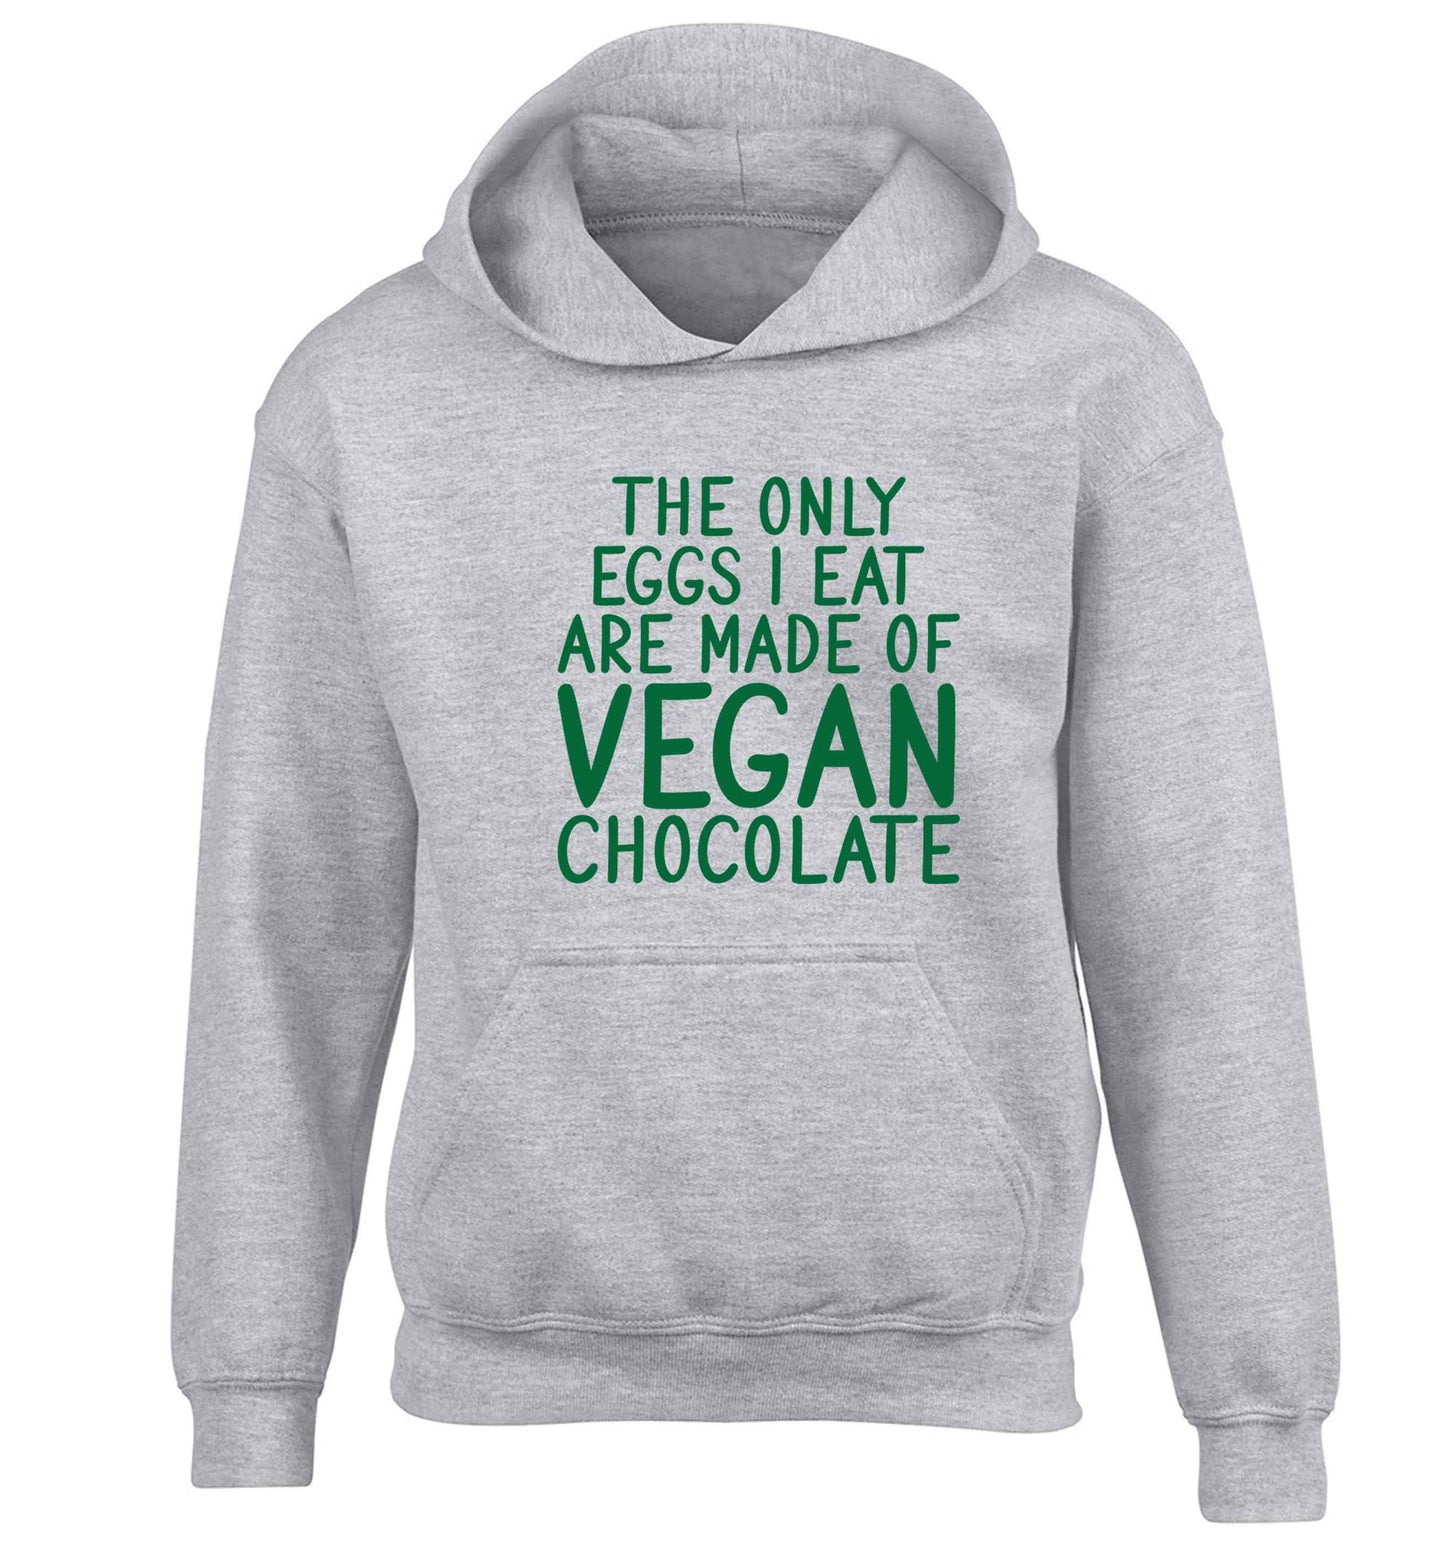 The only eggs I eat are made of vegan chocolate children's grey hoodie 12-13 Years